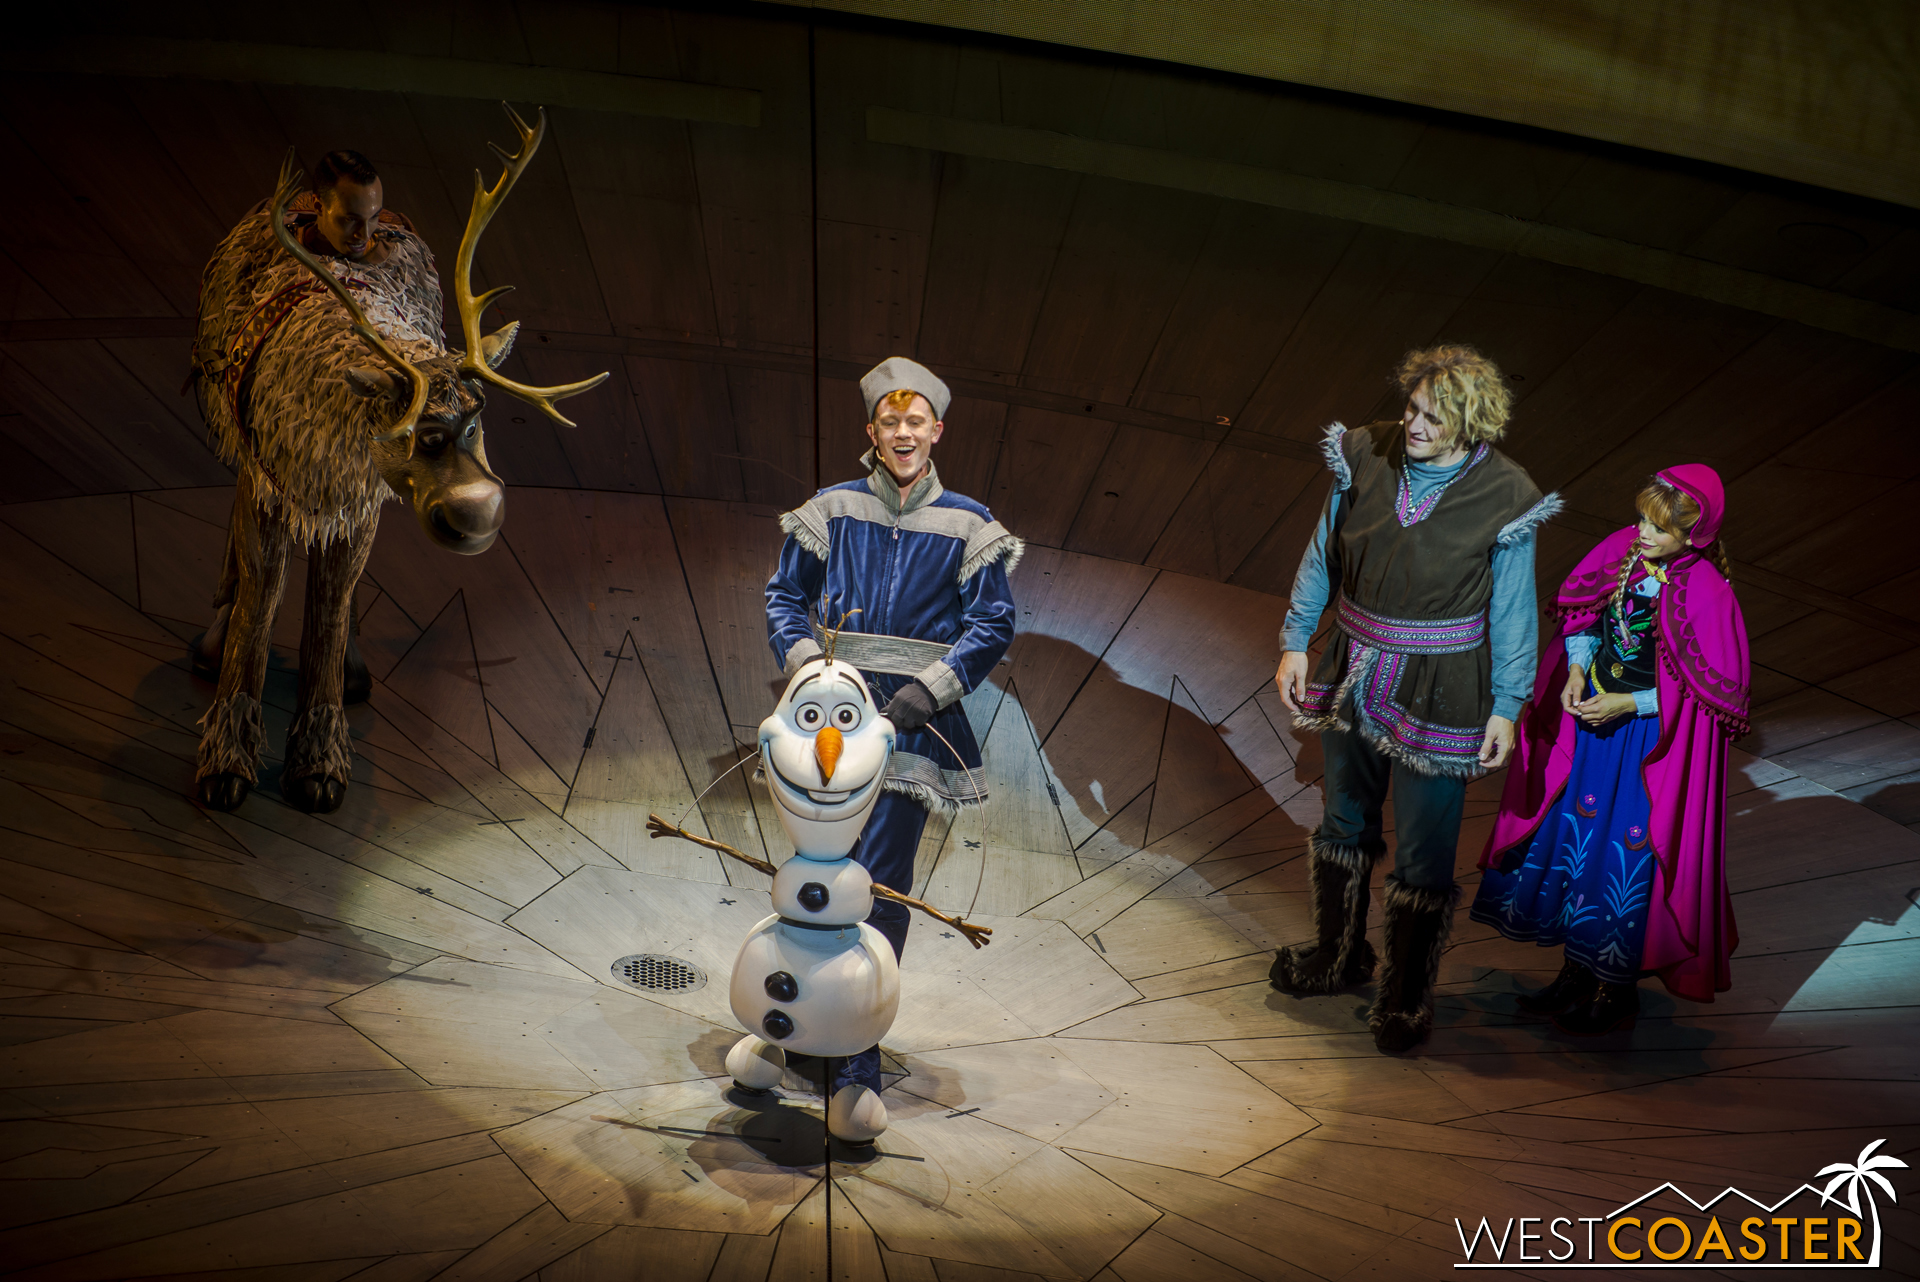  Kristoff and Anna marvel at Olaf's powers, but the magical snowman simply explains, "It's all in the warm hugs." 